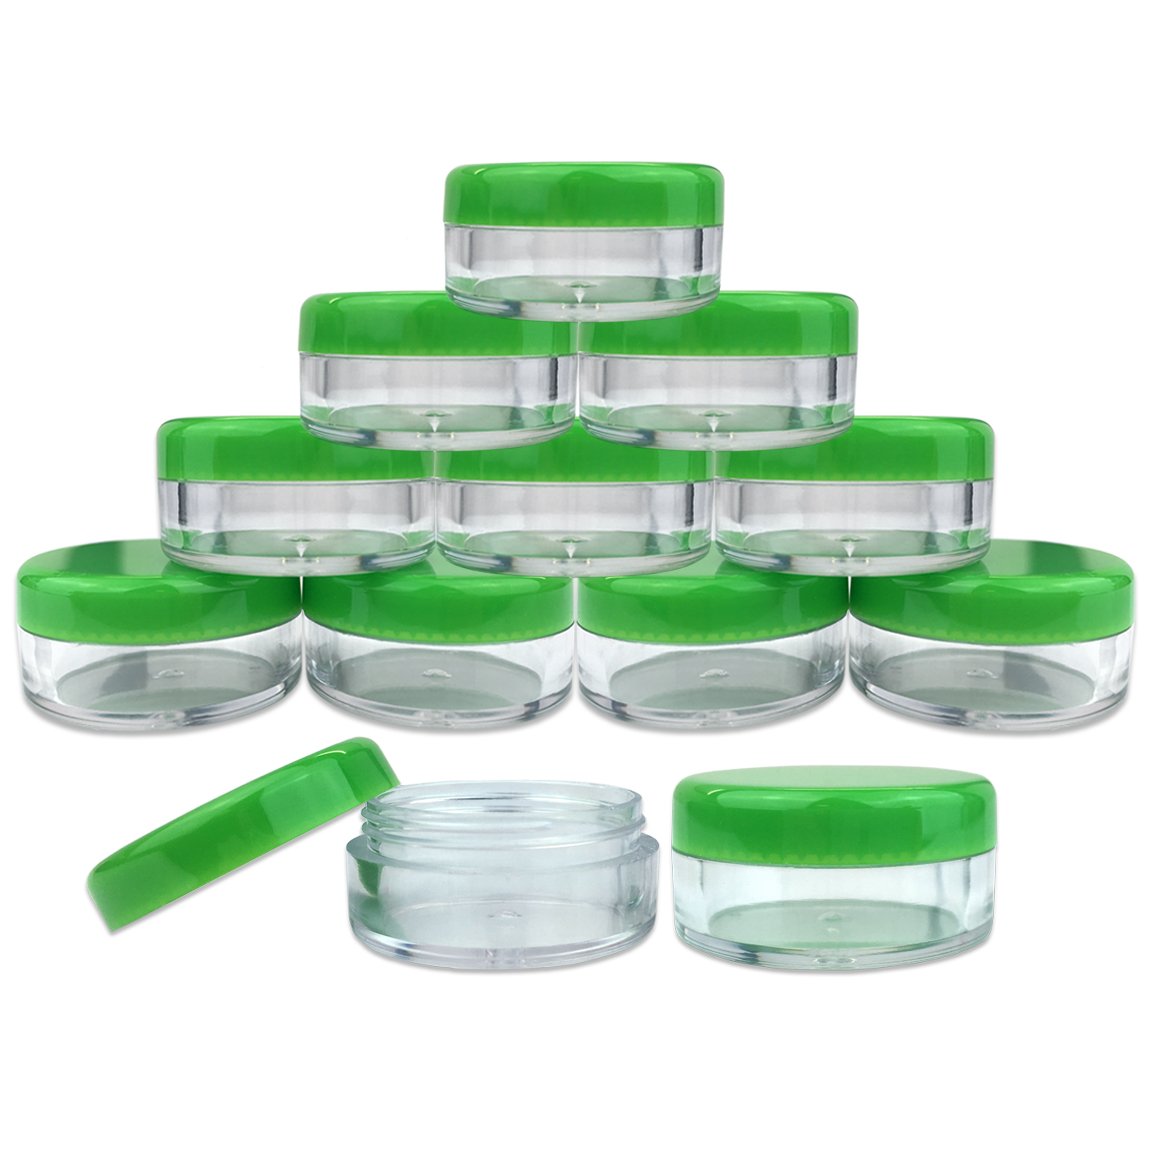 (Quantity: 50 Pieces) Beauticom 5G/5ML Round Clear Jars with GREEN Lids for Scrubs, Oils, Toner, Salves, Creams, Lotions, Makeup Samples, Lip Balms